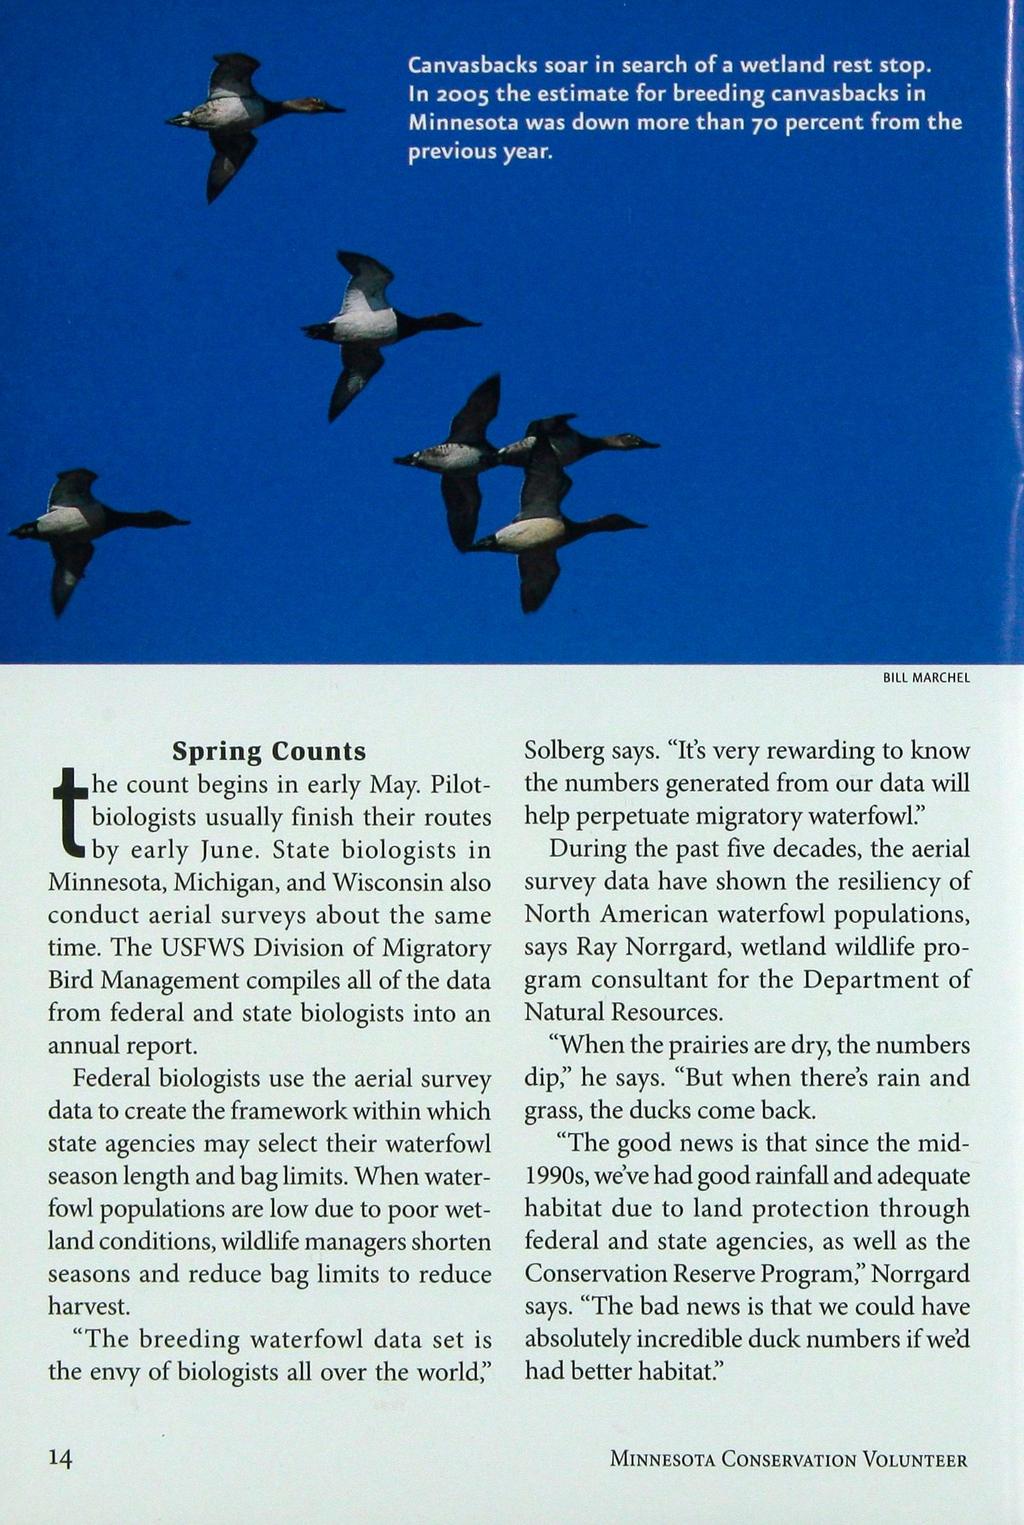 Canvasbacks soar in search of a wetland rest stop. In 2005 the estimate for breeding canvasbacks in Minnesota was down more than 70 percent from the previous year.